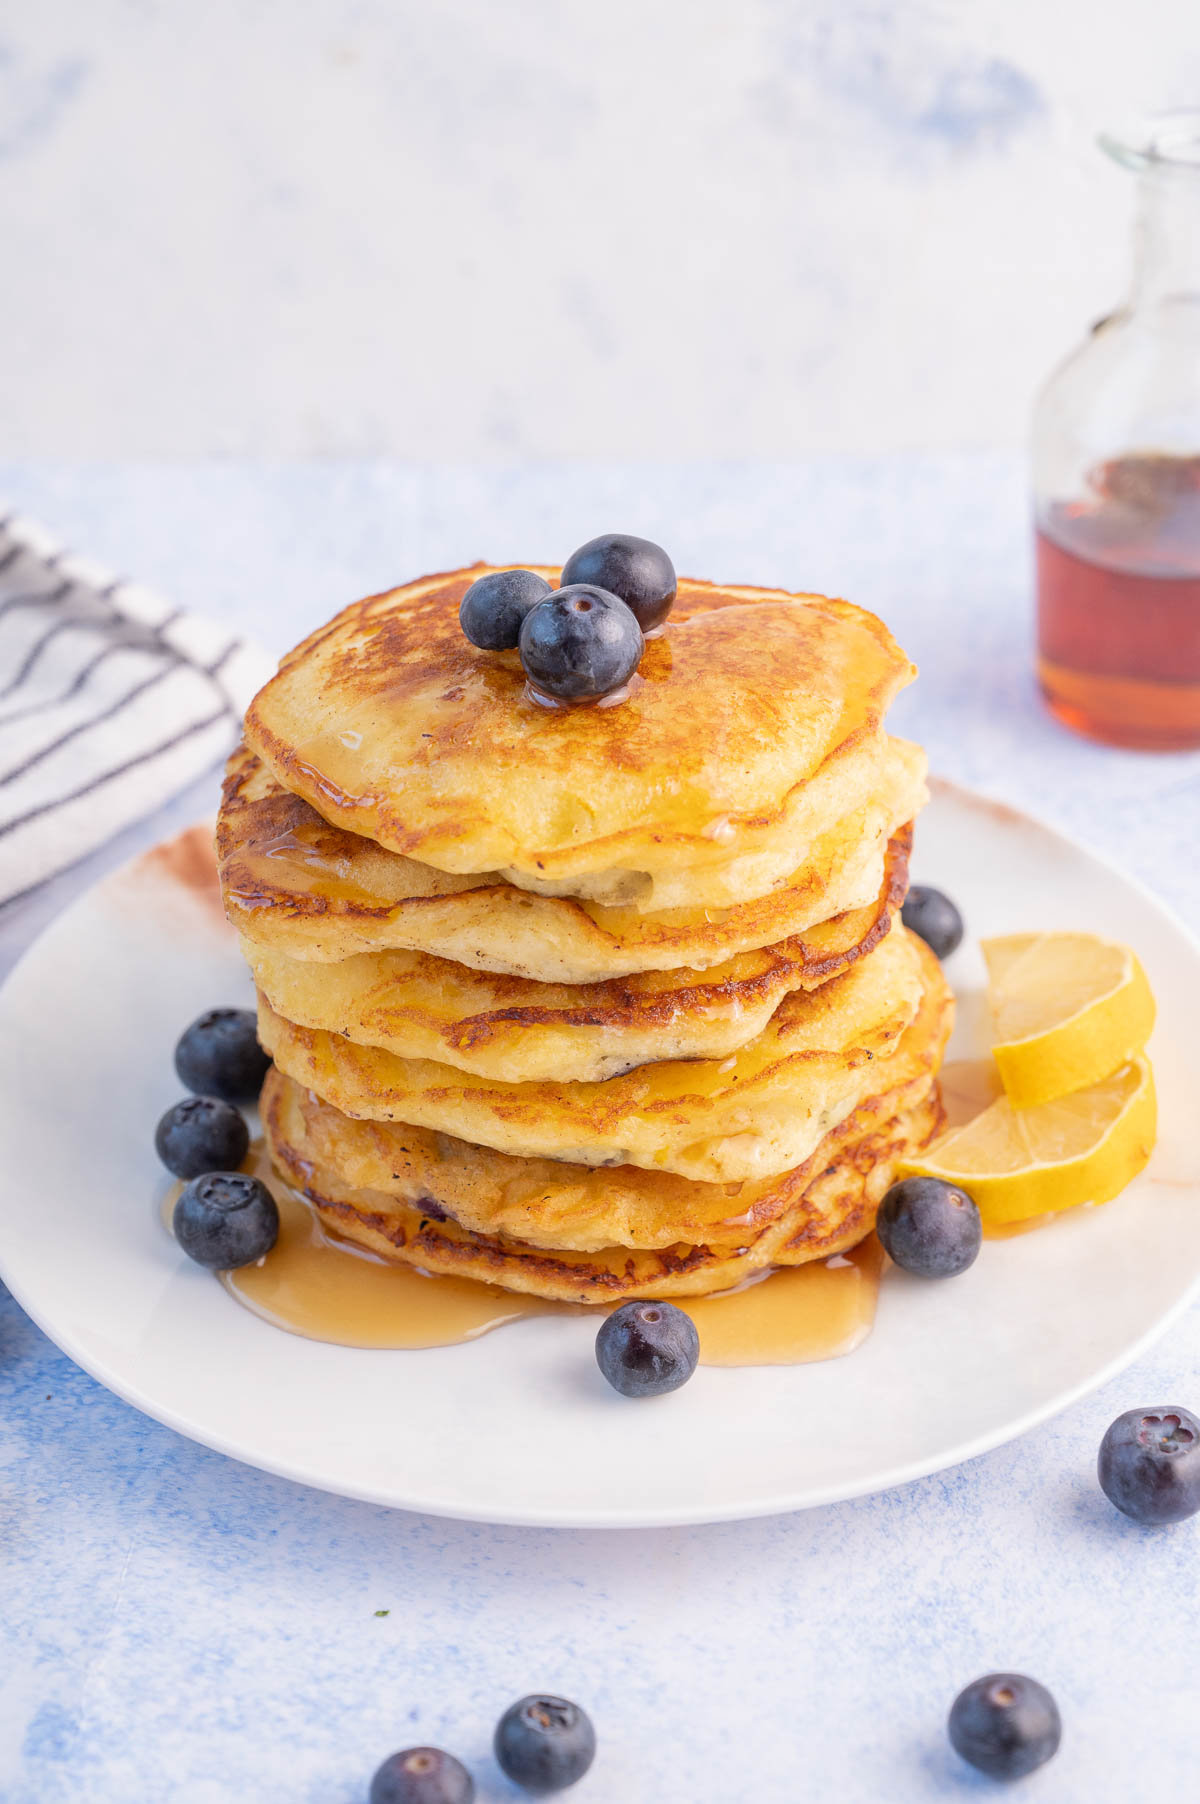 A stack of blueberry buttermilk pancakes on a white plate with blueberries and lemon slices.